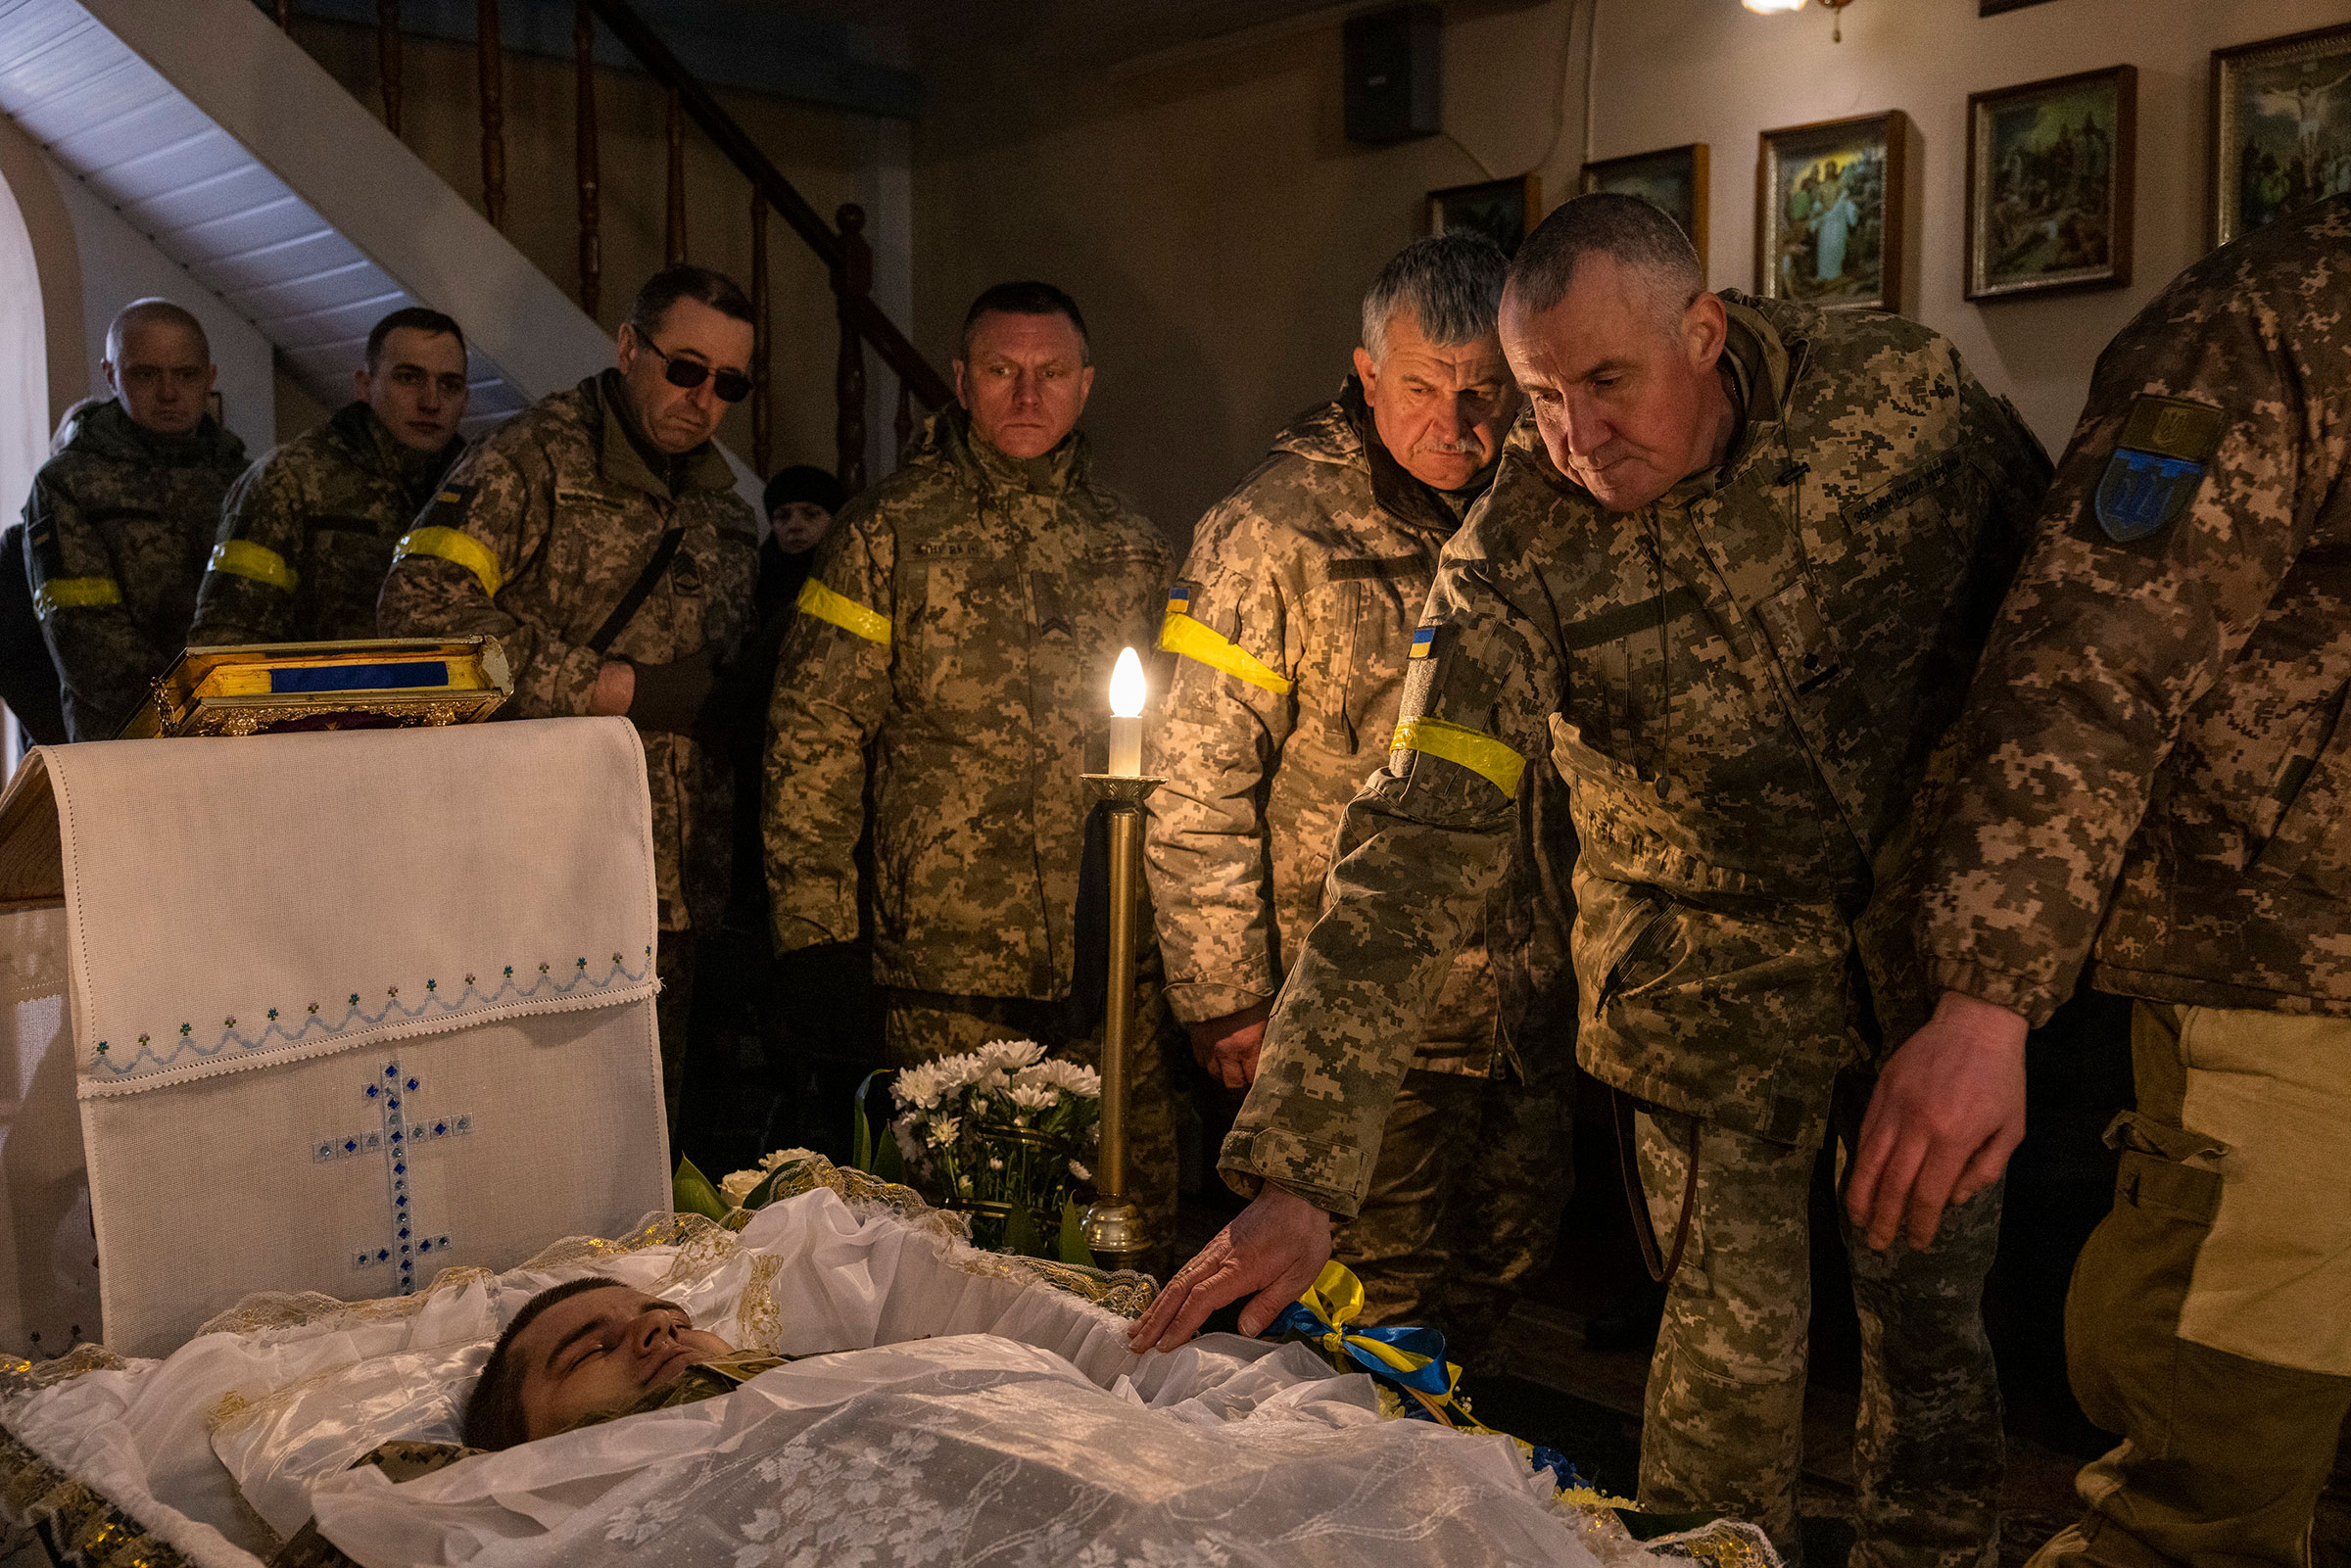 Mourners attend the funeral for Senior Sgt. Yevhen Verveyko of the Ukrainian National Army, who was killed while fighting Russian forces, in Yavoriv on March 6.